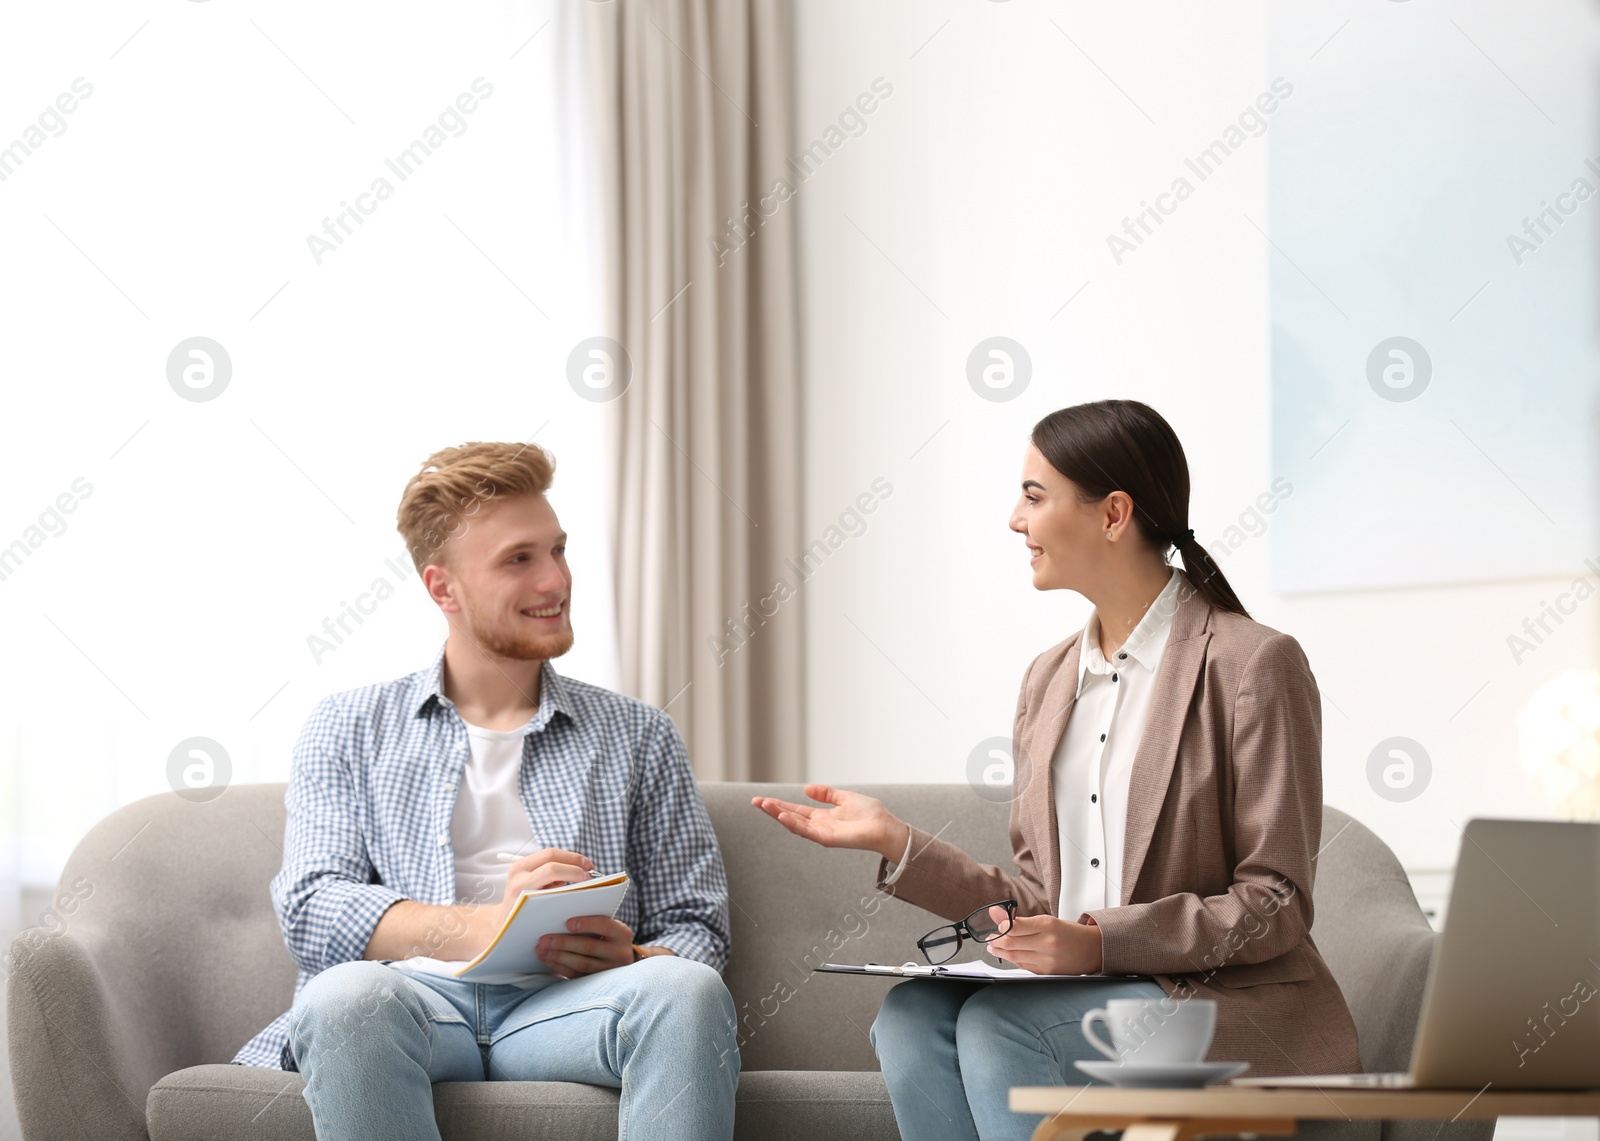 Photo of Female insurance agent consulting young man in office